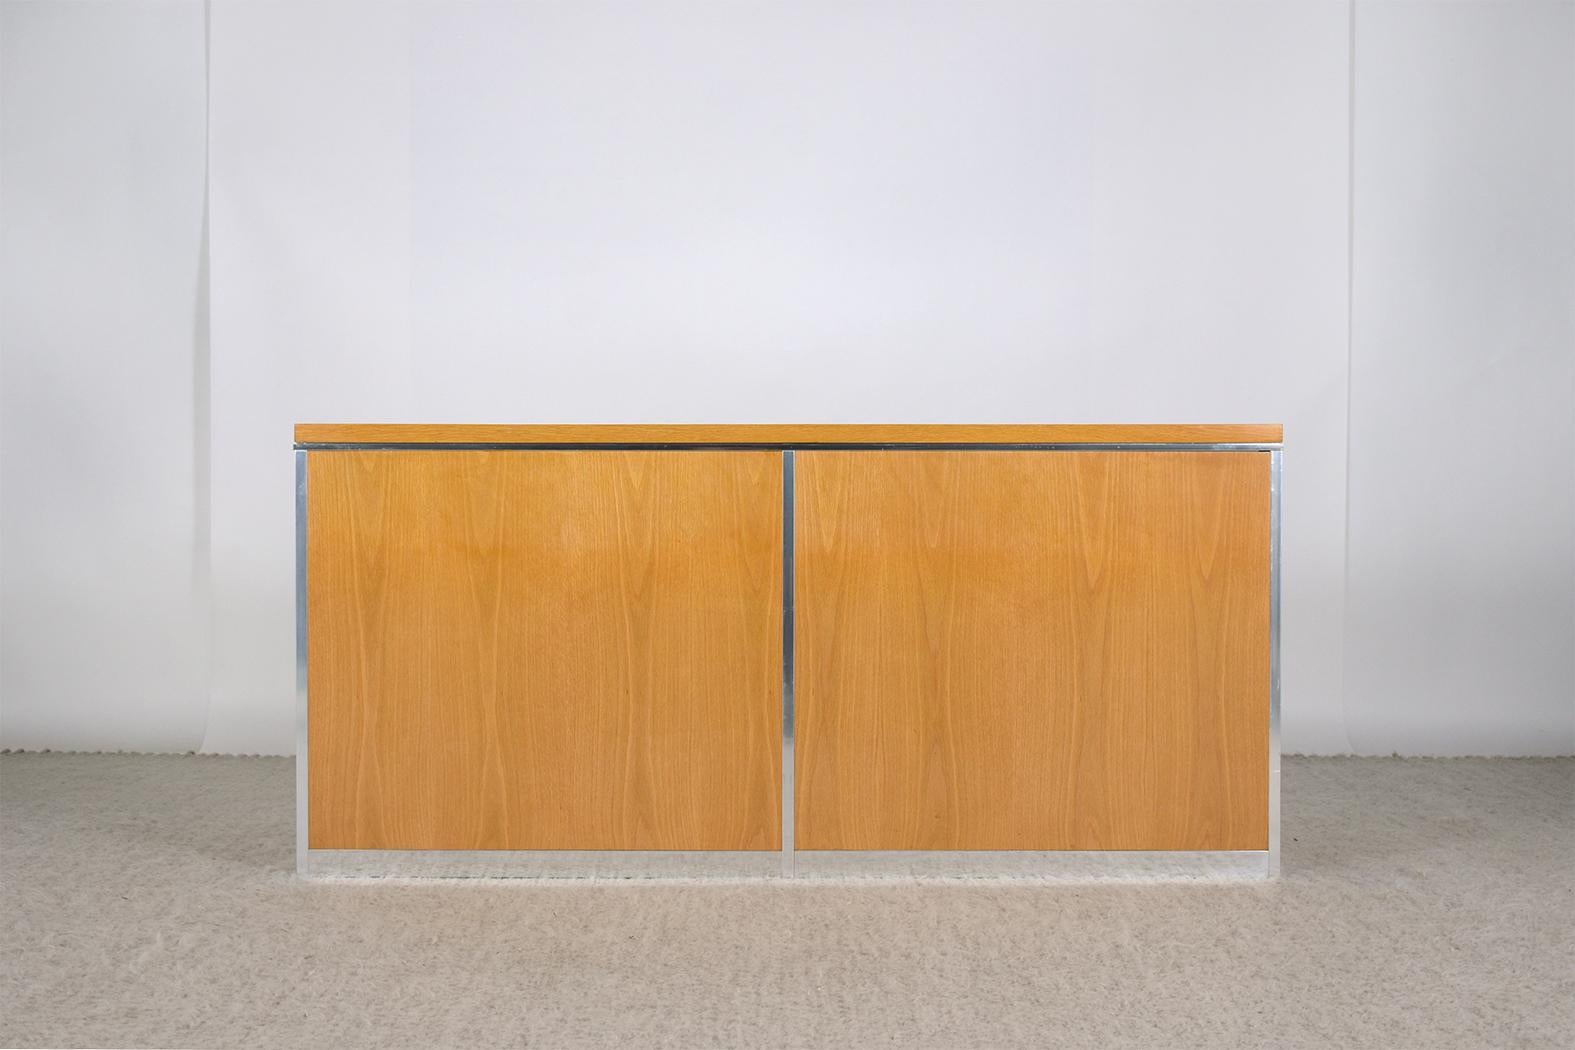 Retro Chic: Vintage 1970s Danish Mid-Century Credenza with White & Yellow Finish For Sale 8